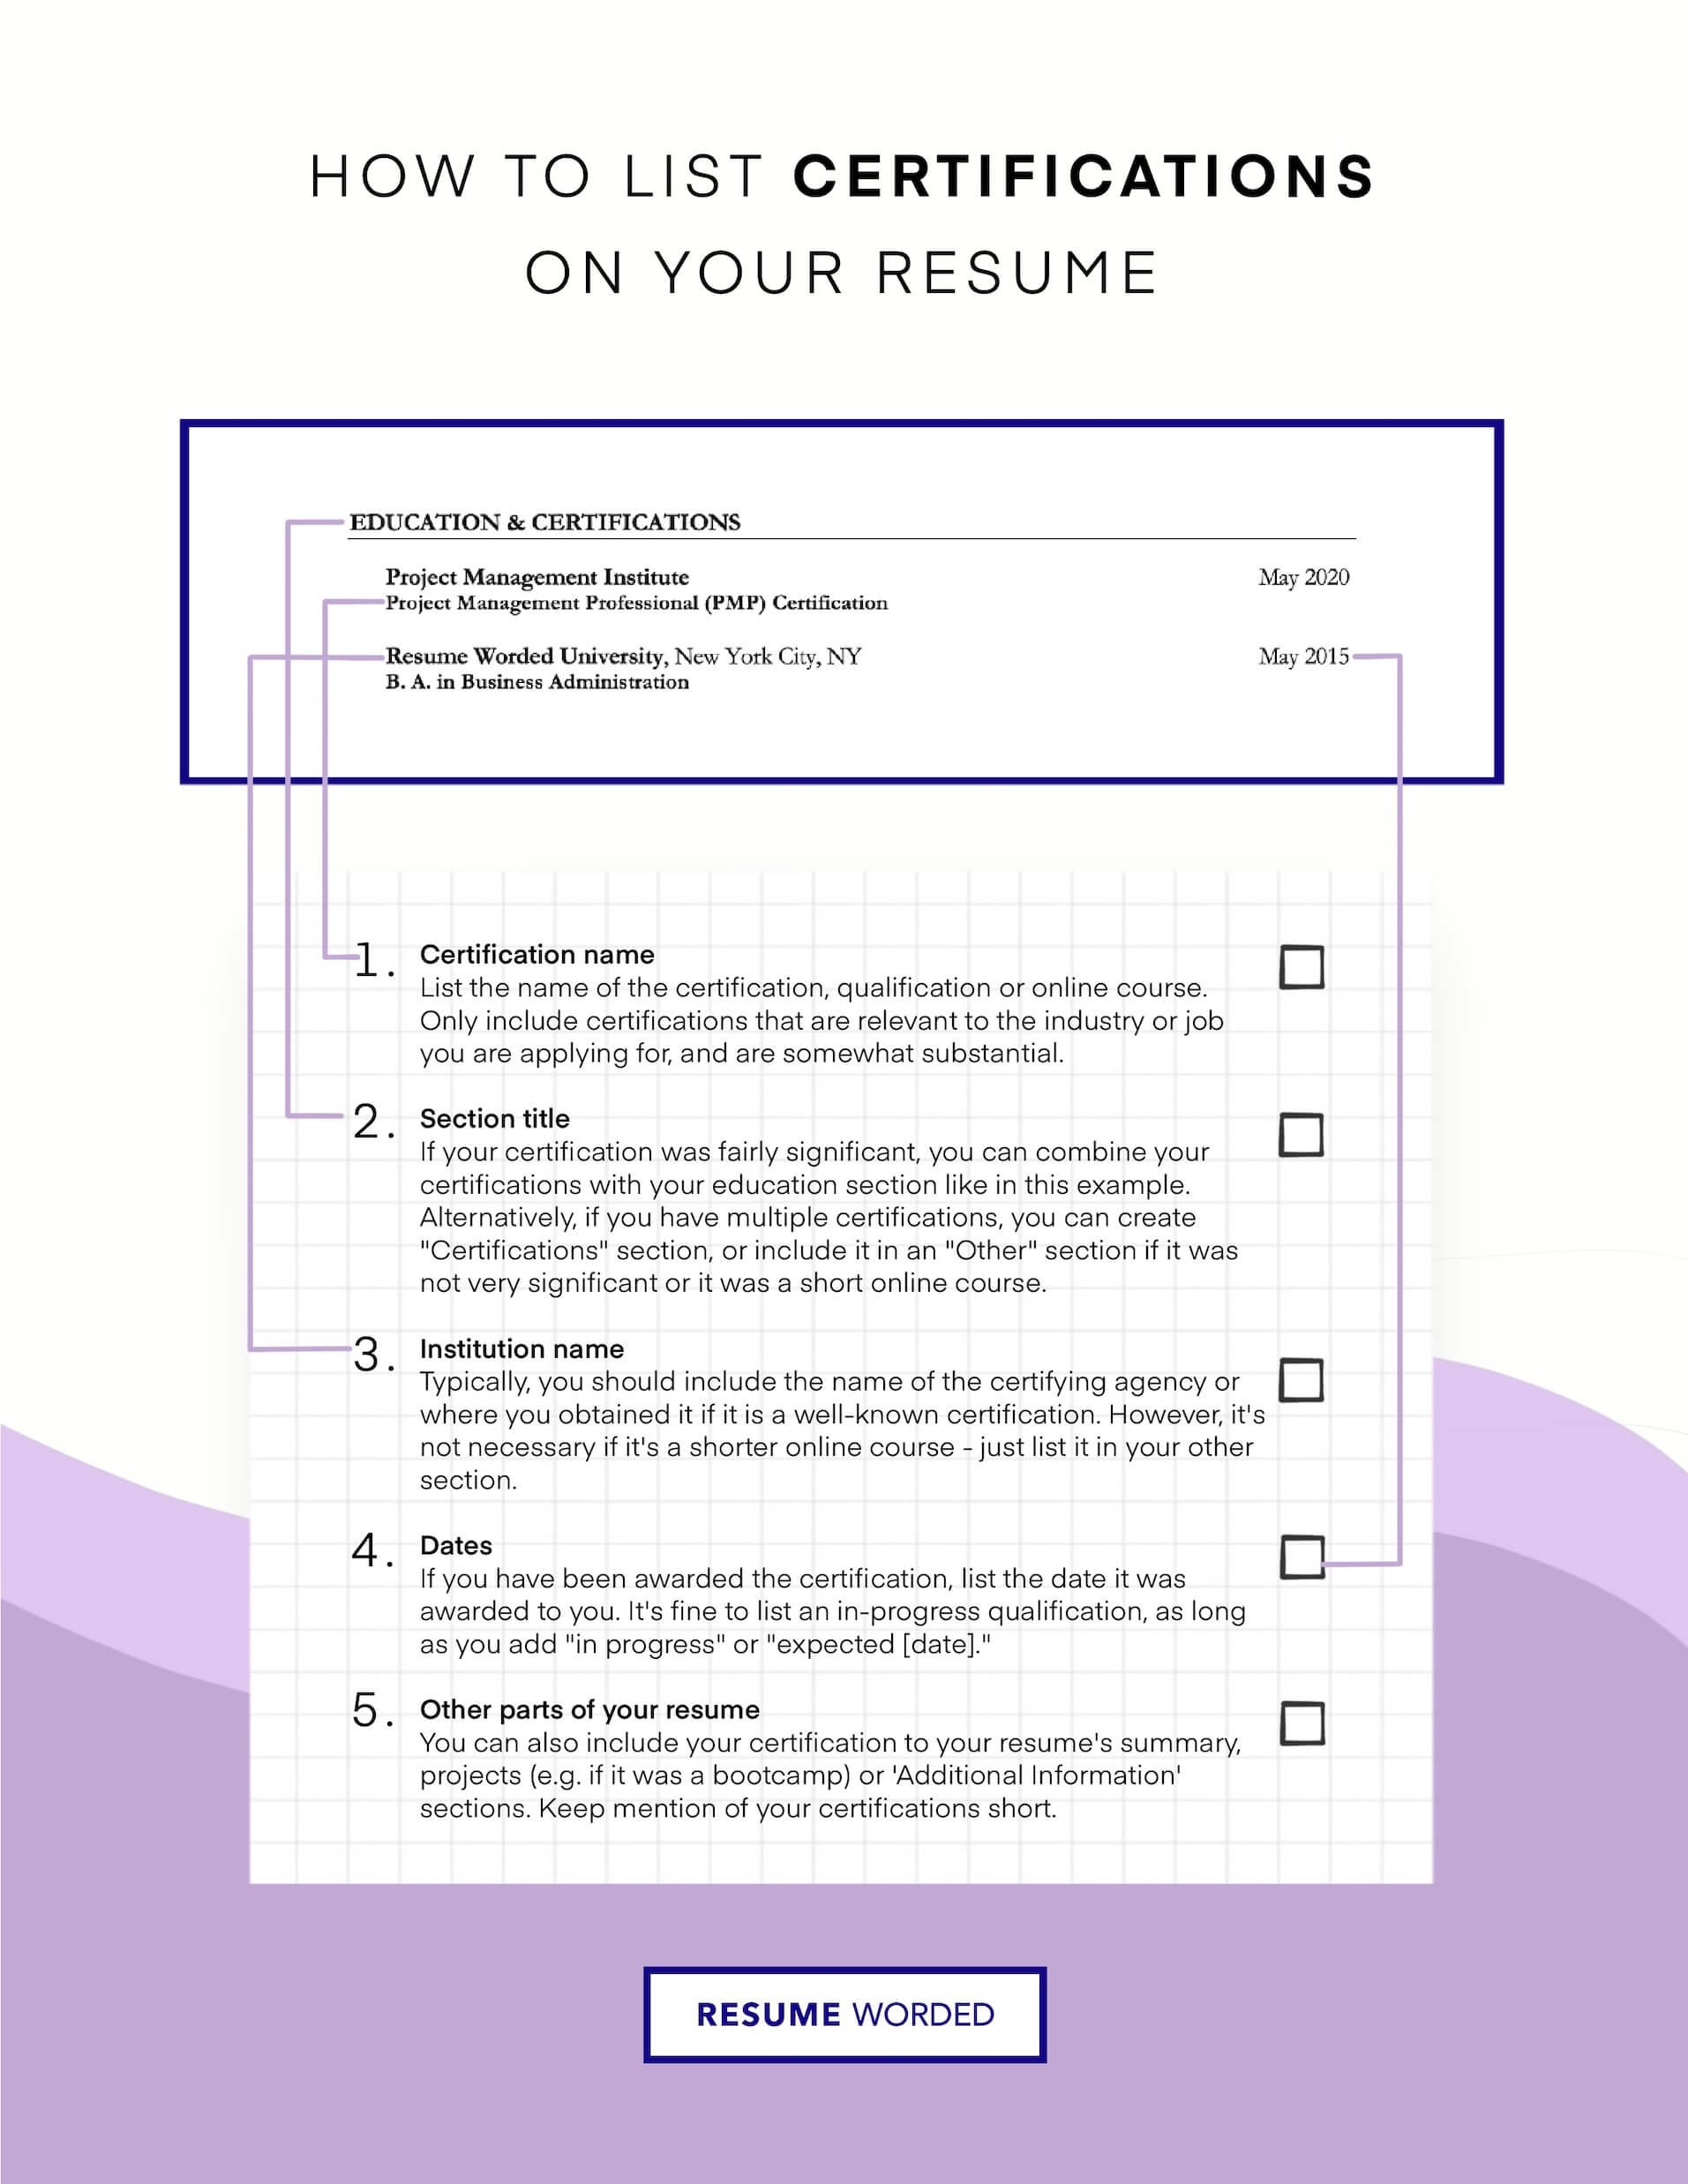 Include certifications and relevant qualifications - Clinical Trial Manager Resume